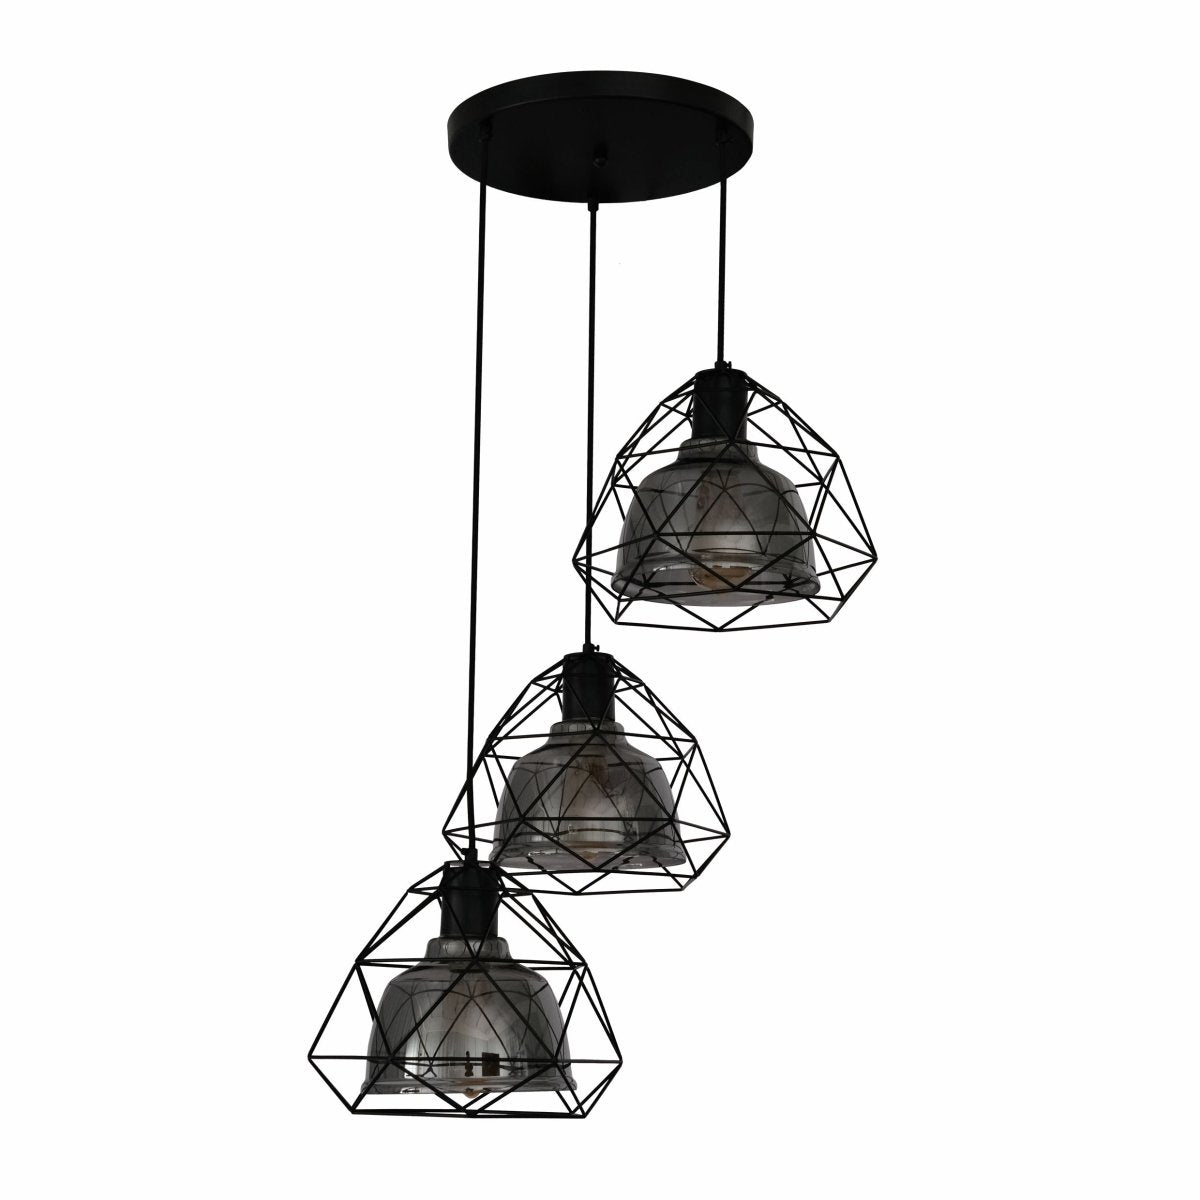 Main image of Smoky Glass Dome Black Metal Cage Pendant Light with 3xE27 Fitting | TEKLED 156-19482